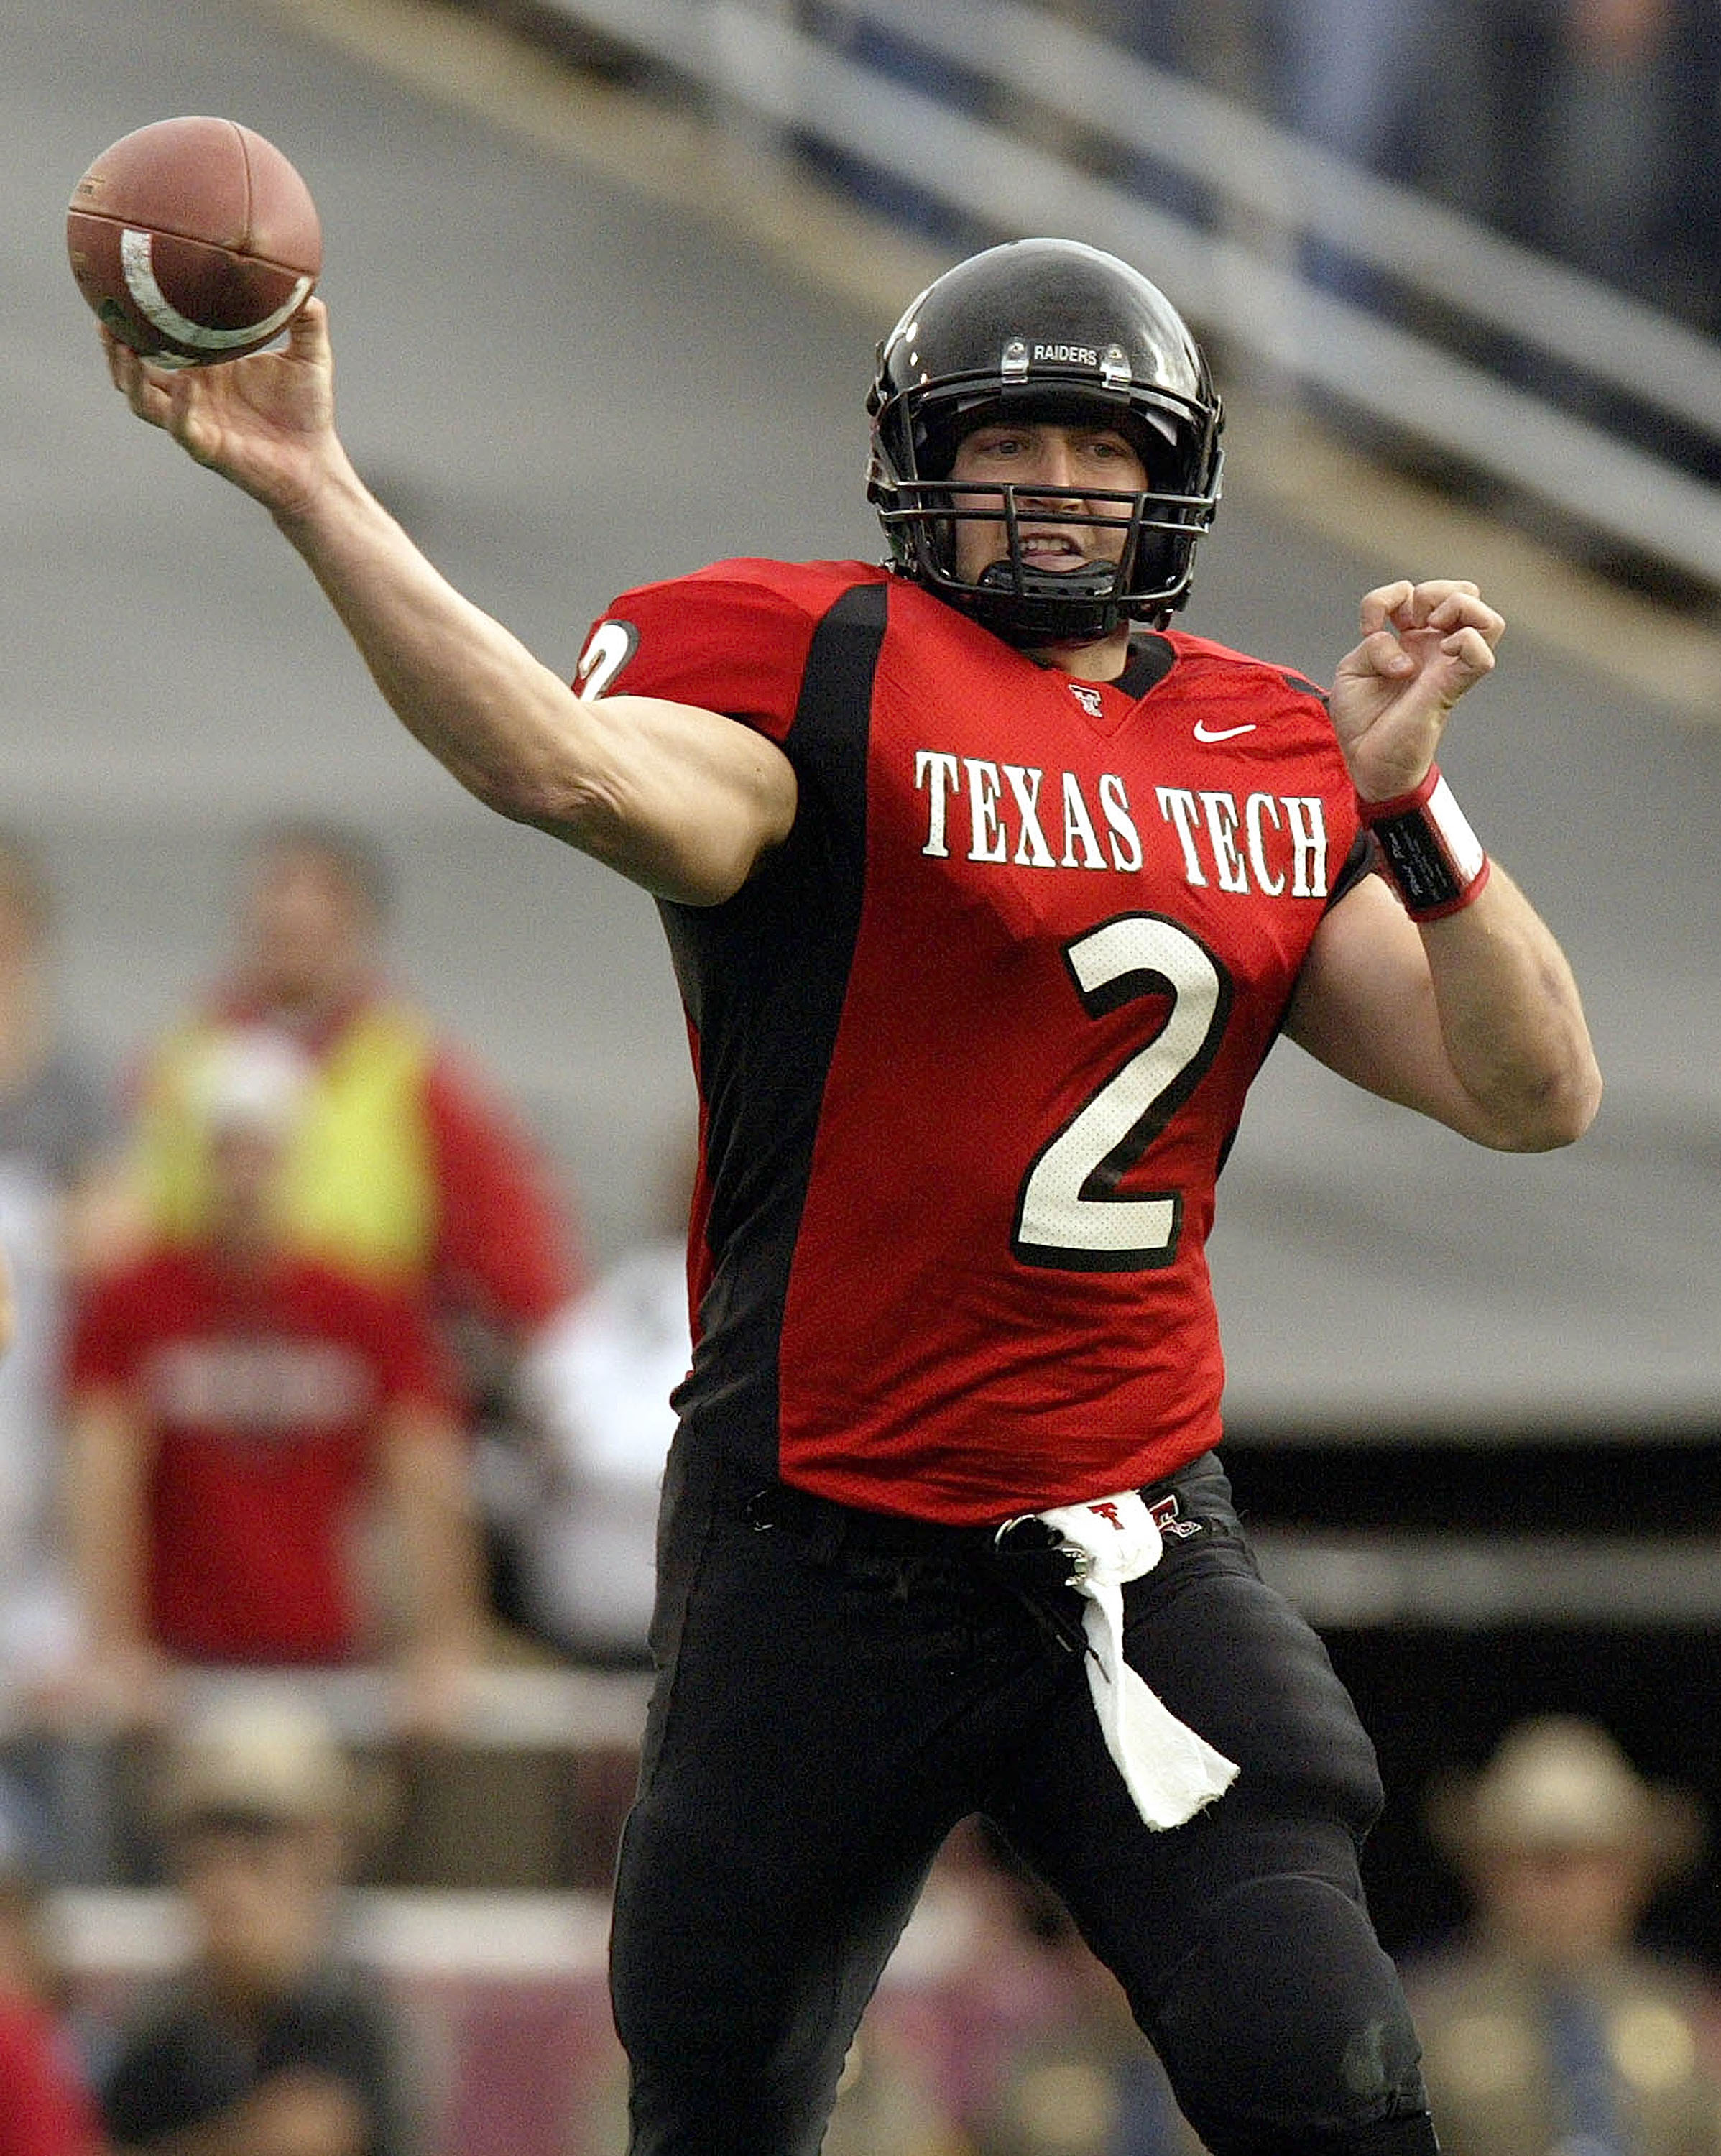 LUBBOCK, TX -NOVEMBER 22:  Quarterback B.J. Symons #2 of the Texas Tech Red Raiders drops back to pass against the Oklahoma Sooners on November 22, 2003 at Jones SBC Stadium in Lubbock, Texas.  (Photo by Ronald Martinez/Getty Images)